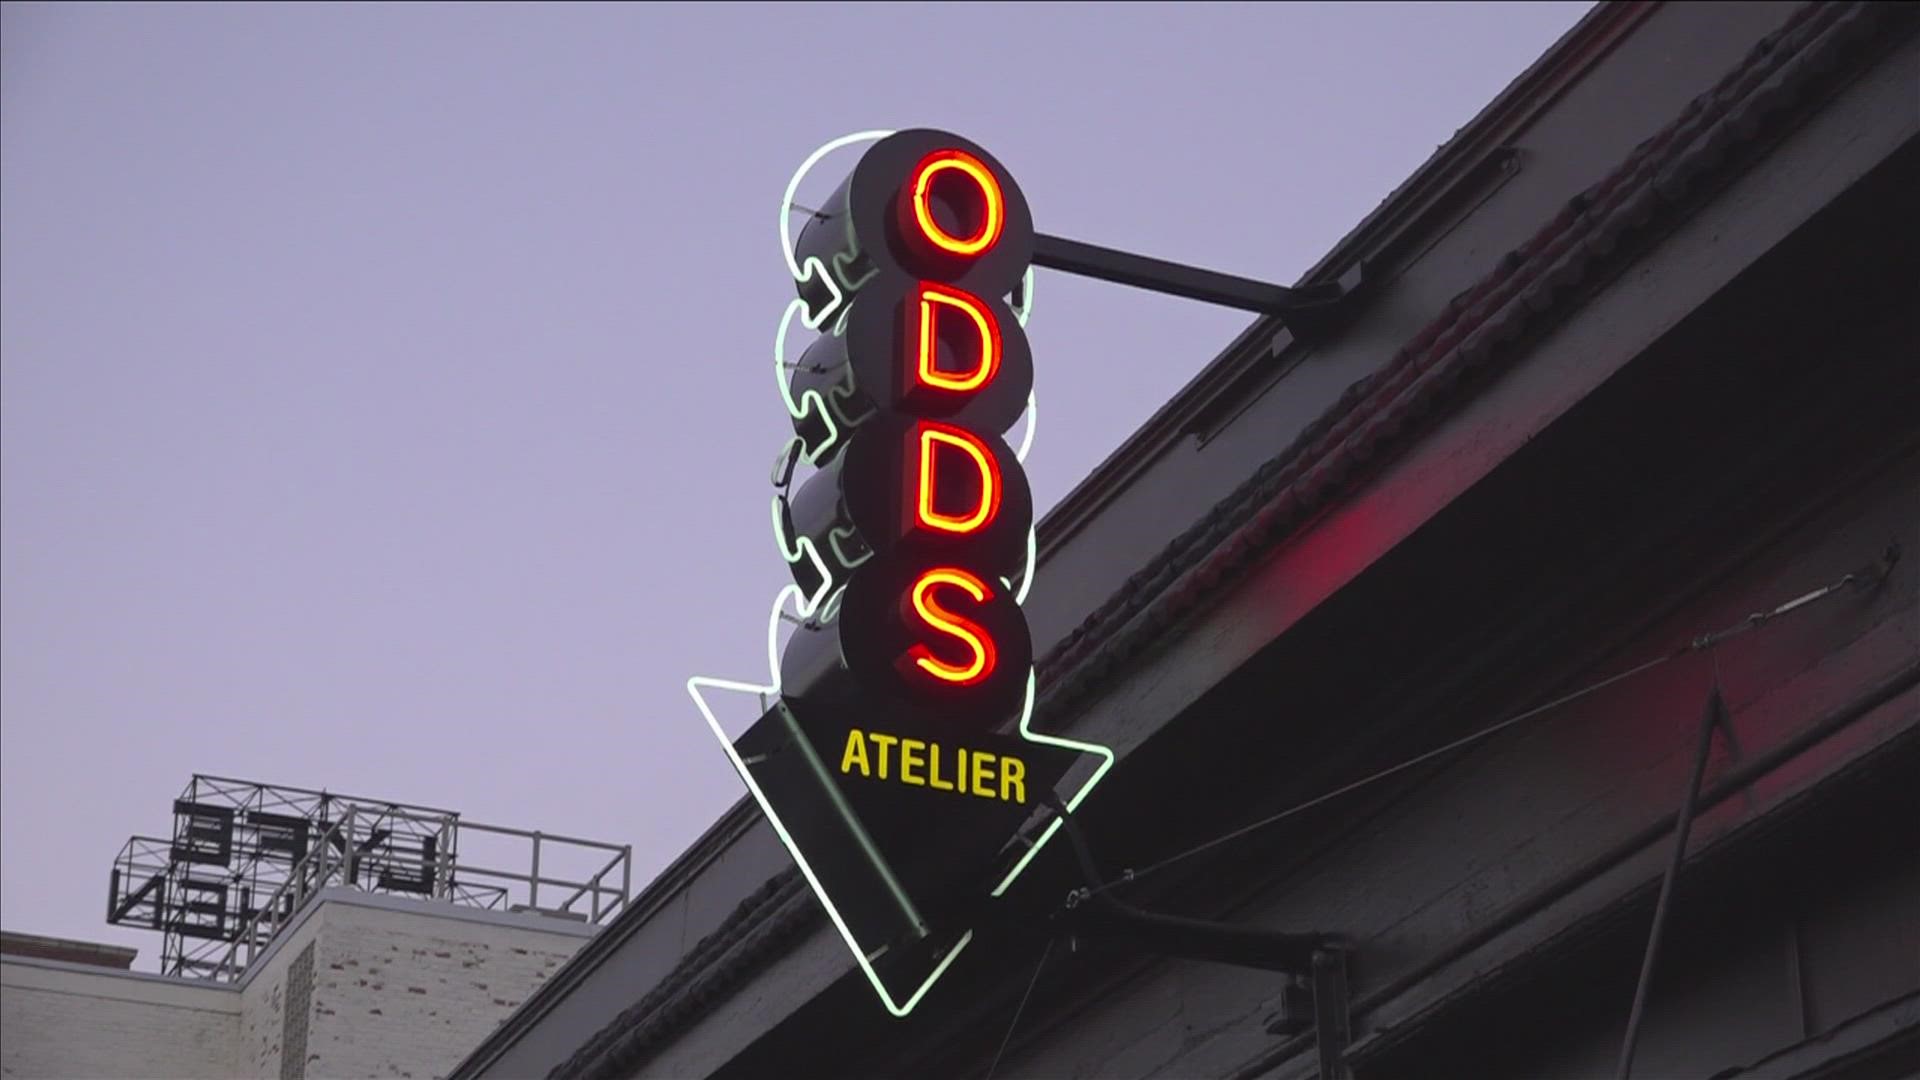 Odds Atelier in downtown Memphis was robbed early Wednesday morning. It’s the third street wear clothing store robbed in the last three months.